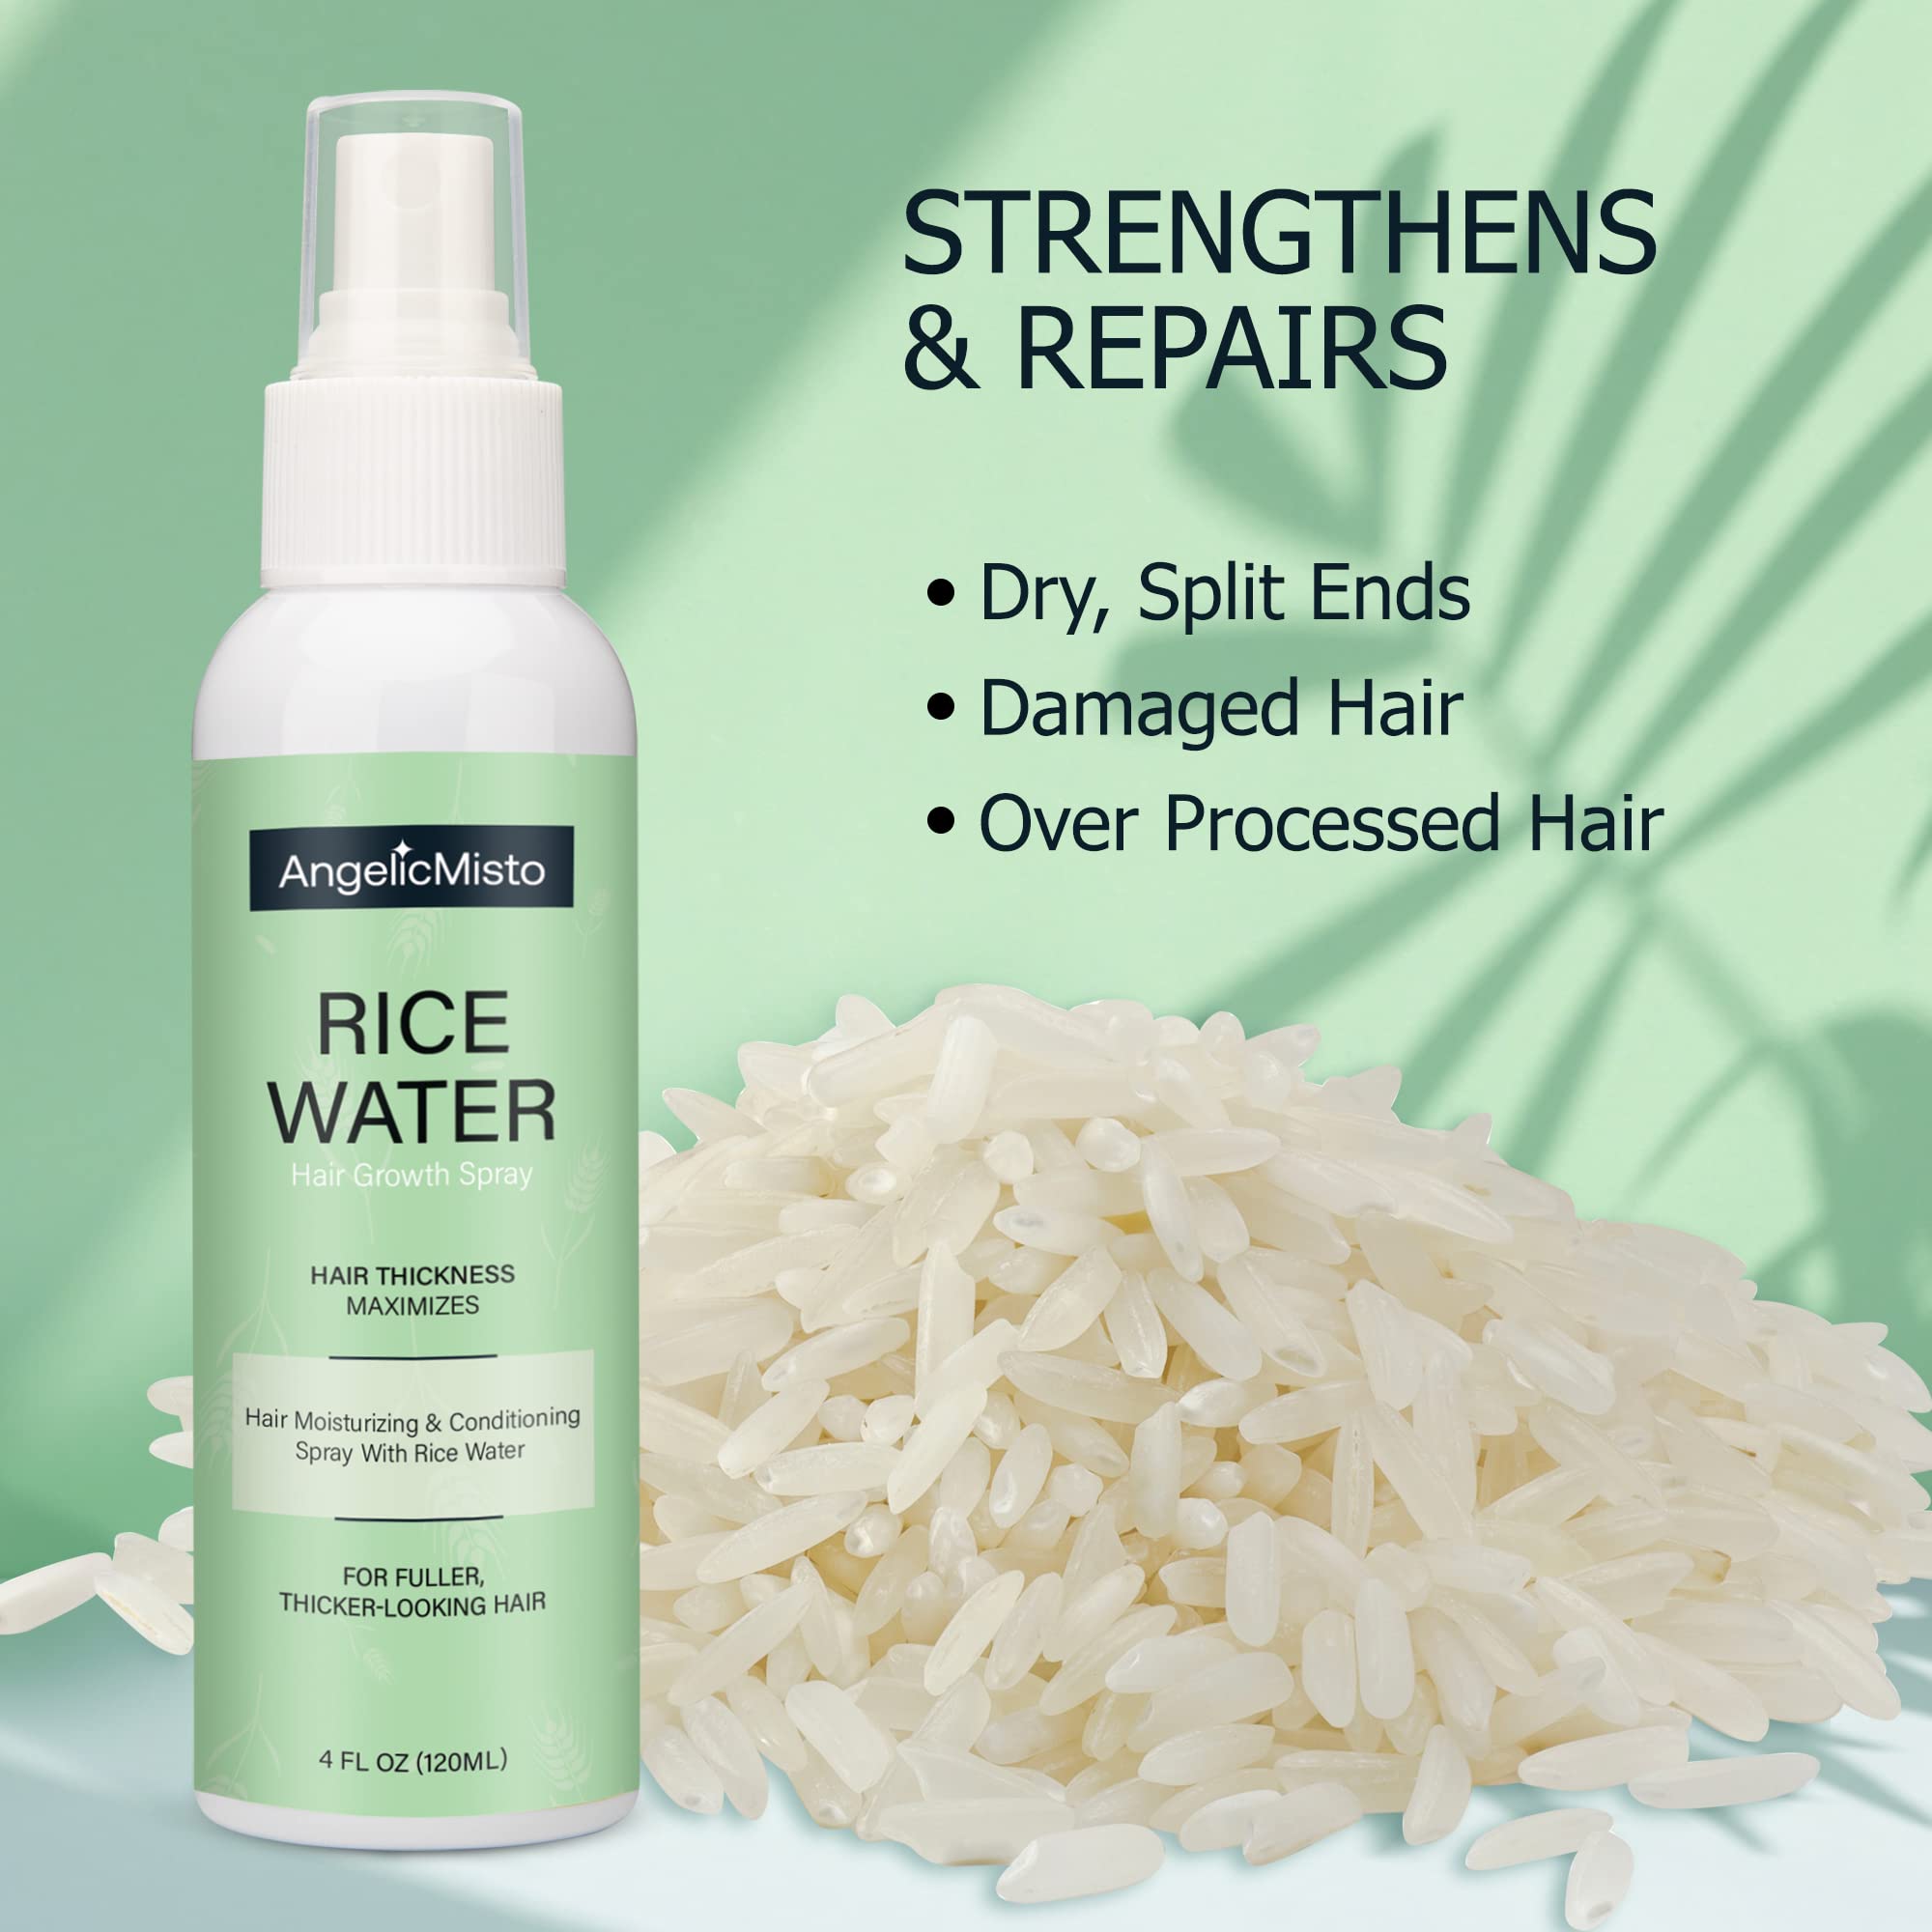 Rice Water For Hair Growth, All Natural Vegan Leave in Conditioner Spray Hair Care Products for Woman&Men, Biotin Infused Leave In Conditioner. Rice Water Hair Mist For Dry, Frizzy, Weak, Damaged Hair - Strengthen, Moisturize & Thicken Hair Naturally - 4o